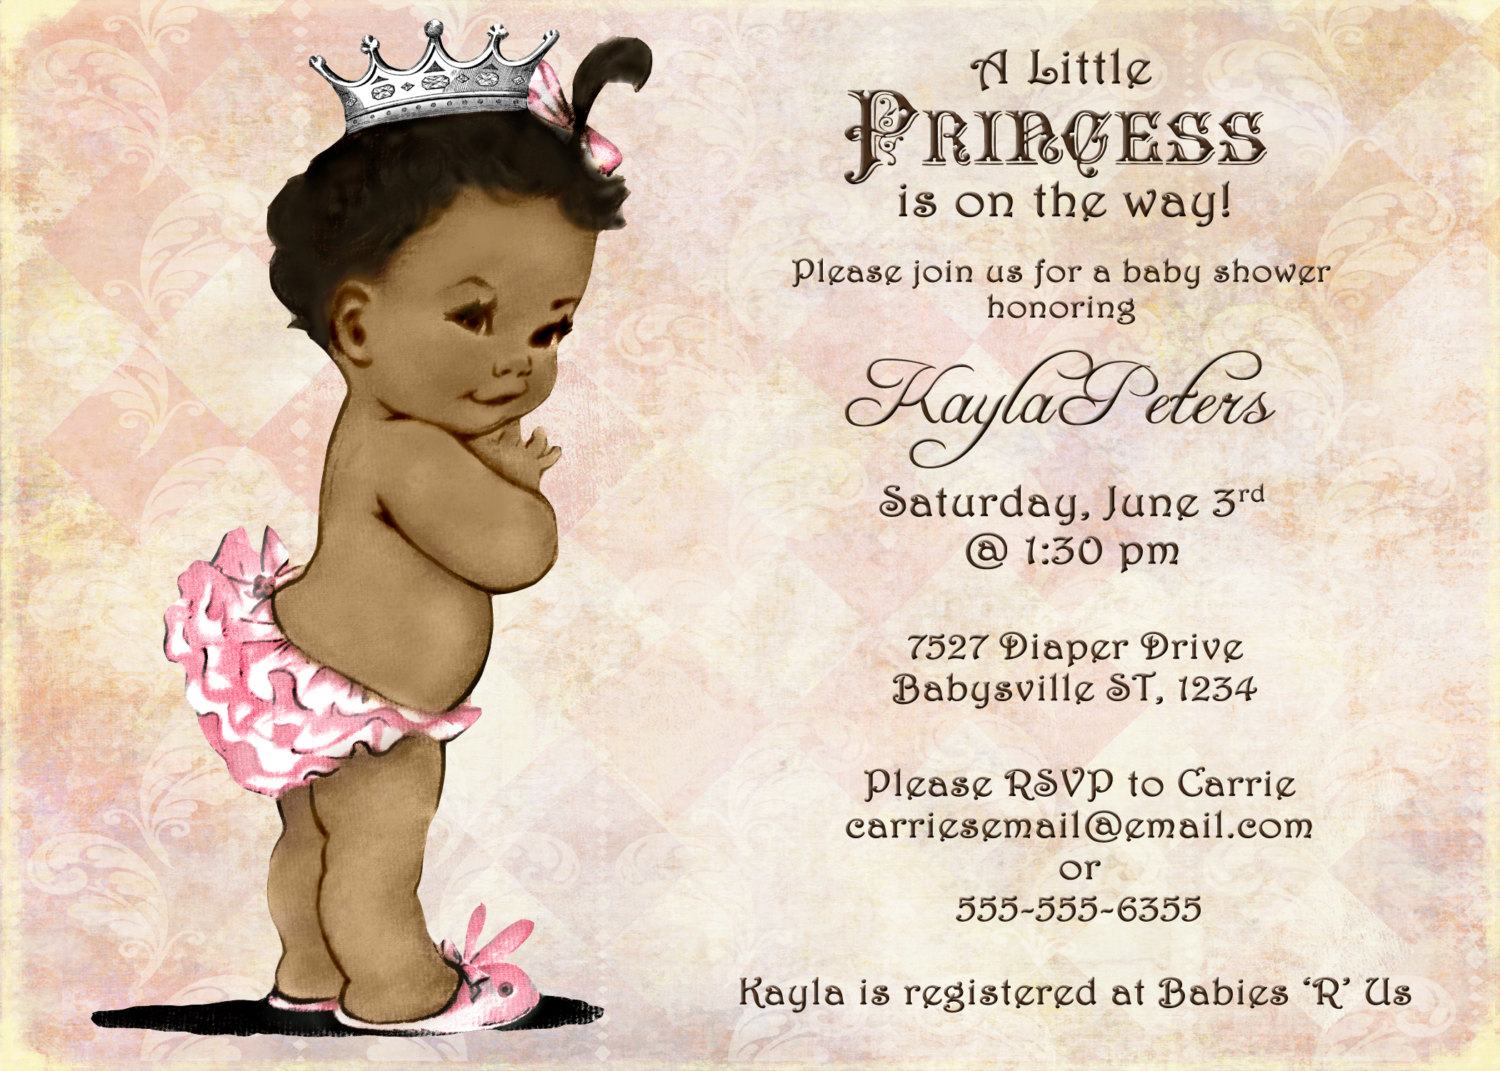 Full Size of Baby Shower:63+ Delightful Cheap Baby Shower Invitations Image Inspirations Black Baby Shower Invitations Sansalvajecom Black Baby Shower Invitations Is Sensational Ideas Which Can Be Applied Into Your Baby Shower Invitation 1